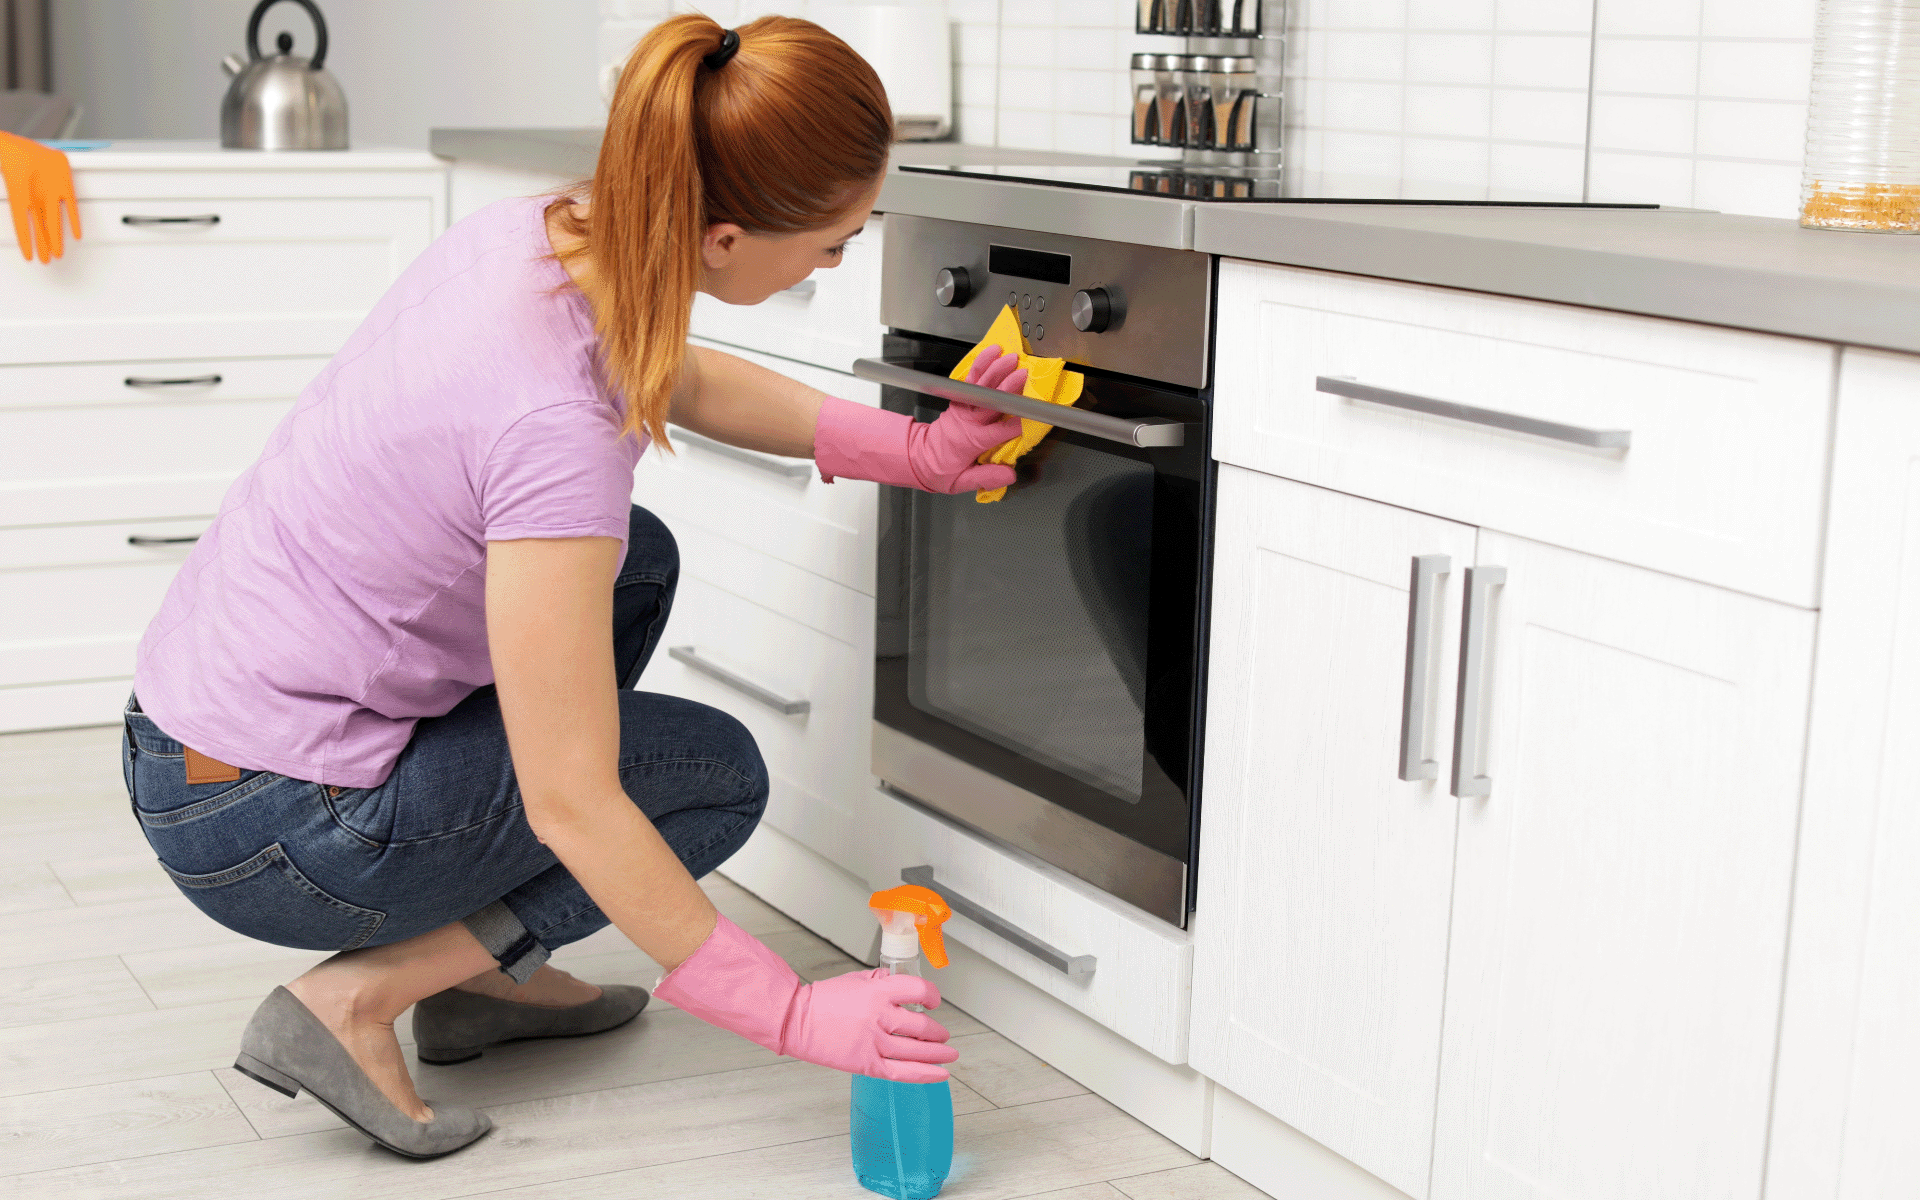 Woman in pink top and gloves cleaning the front of an oven with blue liquid.